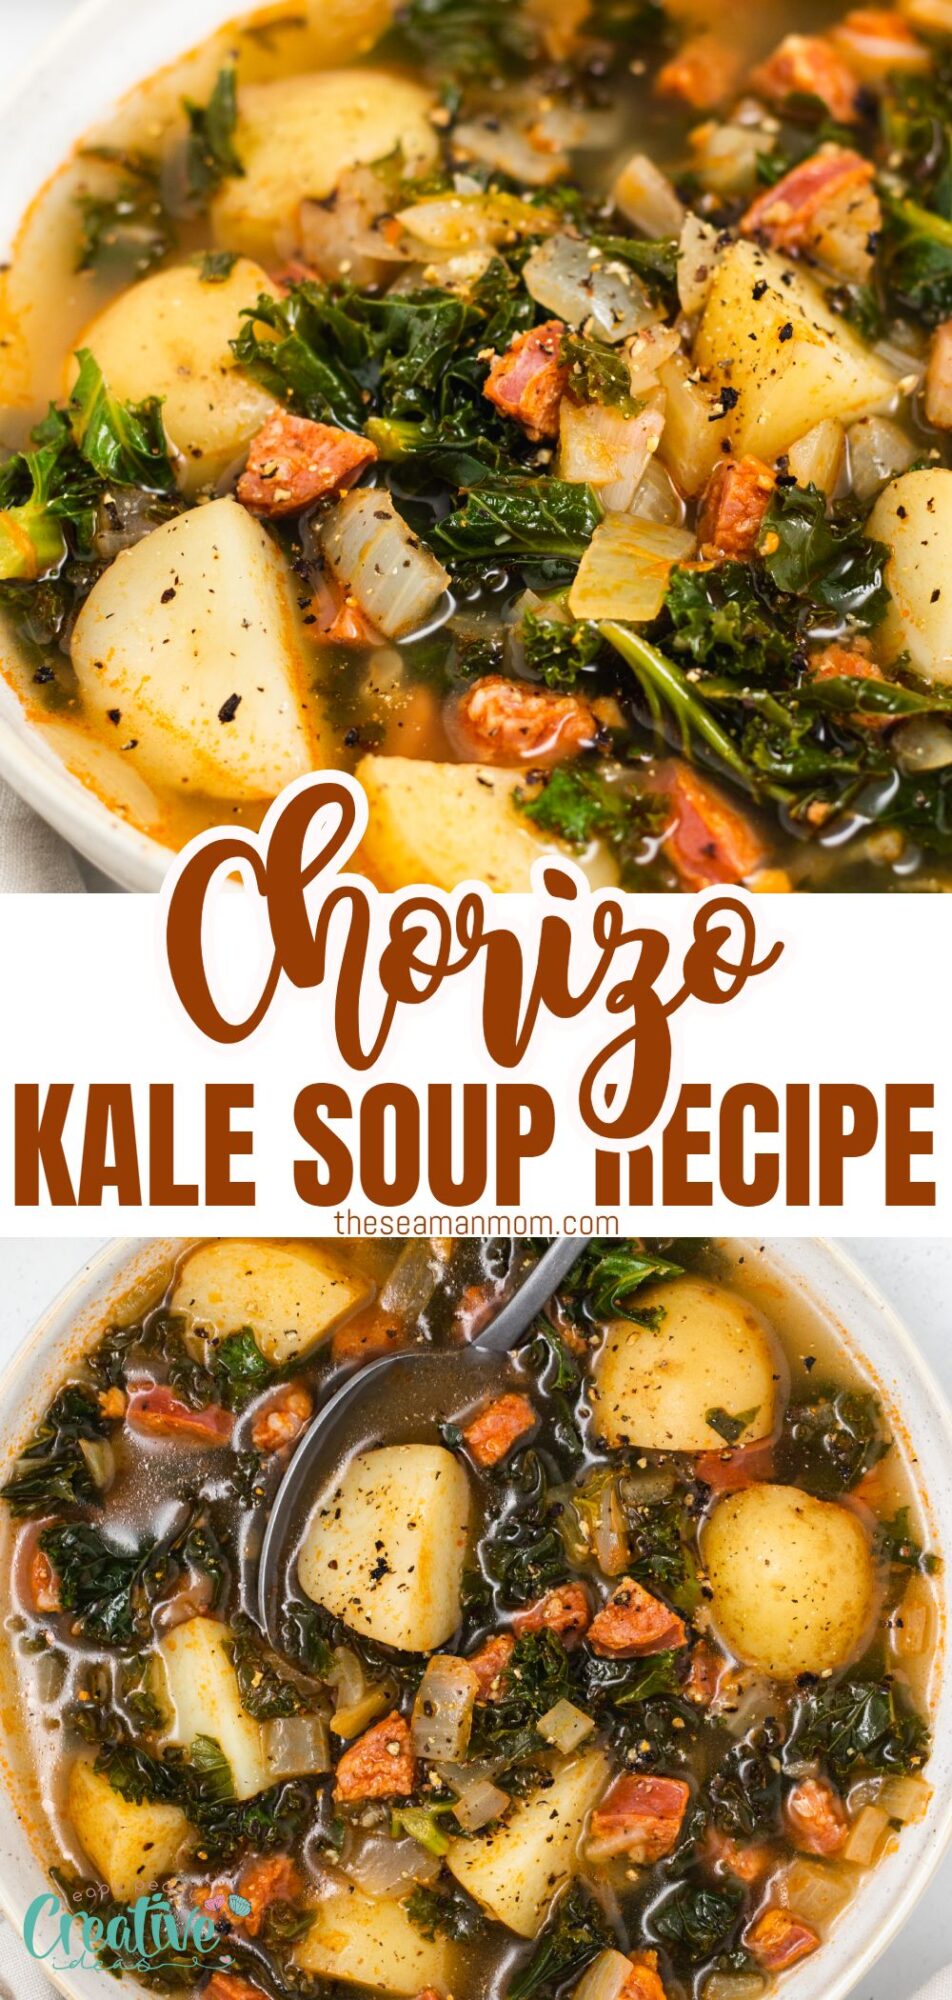 Chef's choice chorizo kale soup recipe: A hearty and nutritious soup made with fresh kale, vegetables, and flavorful seasonings.